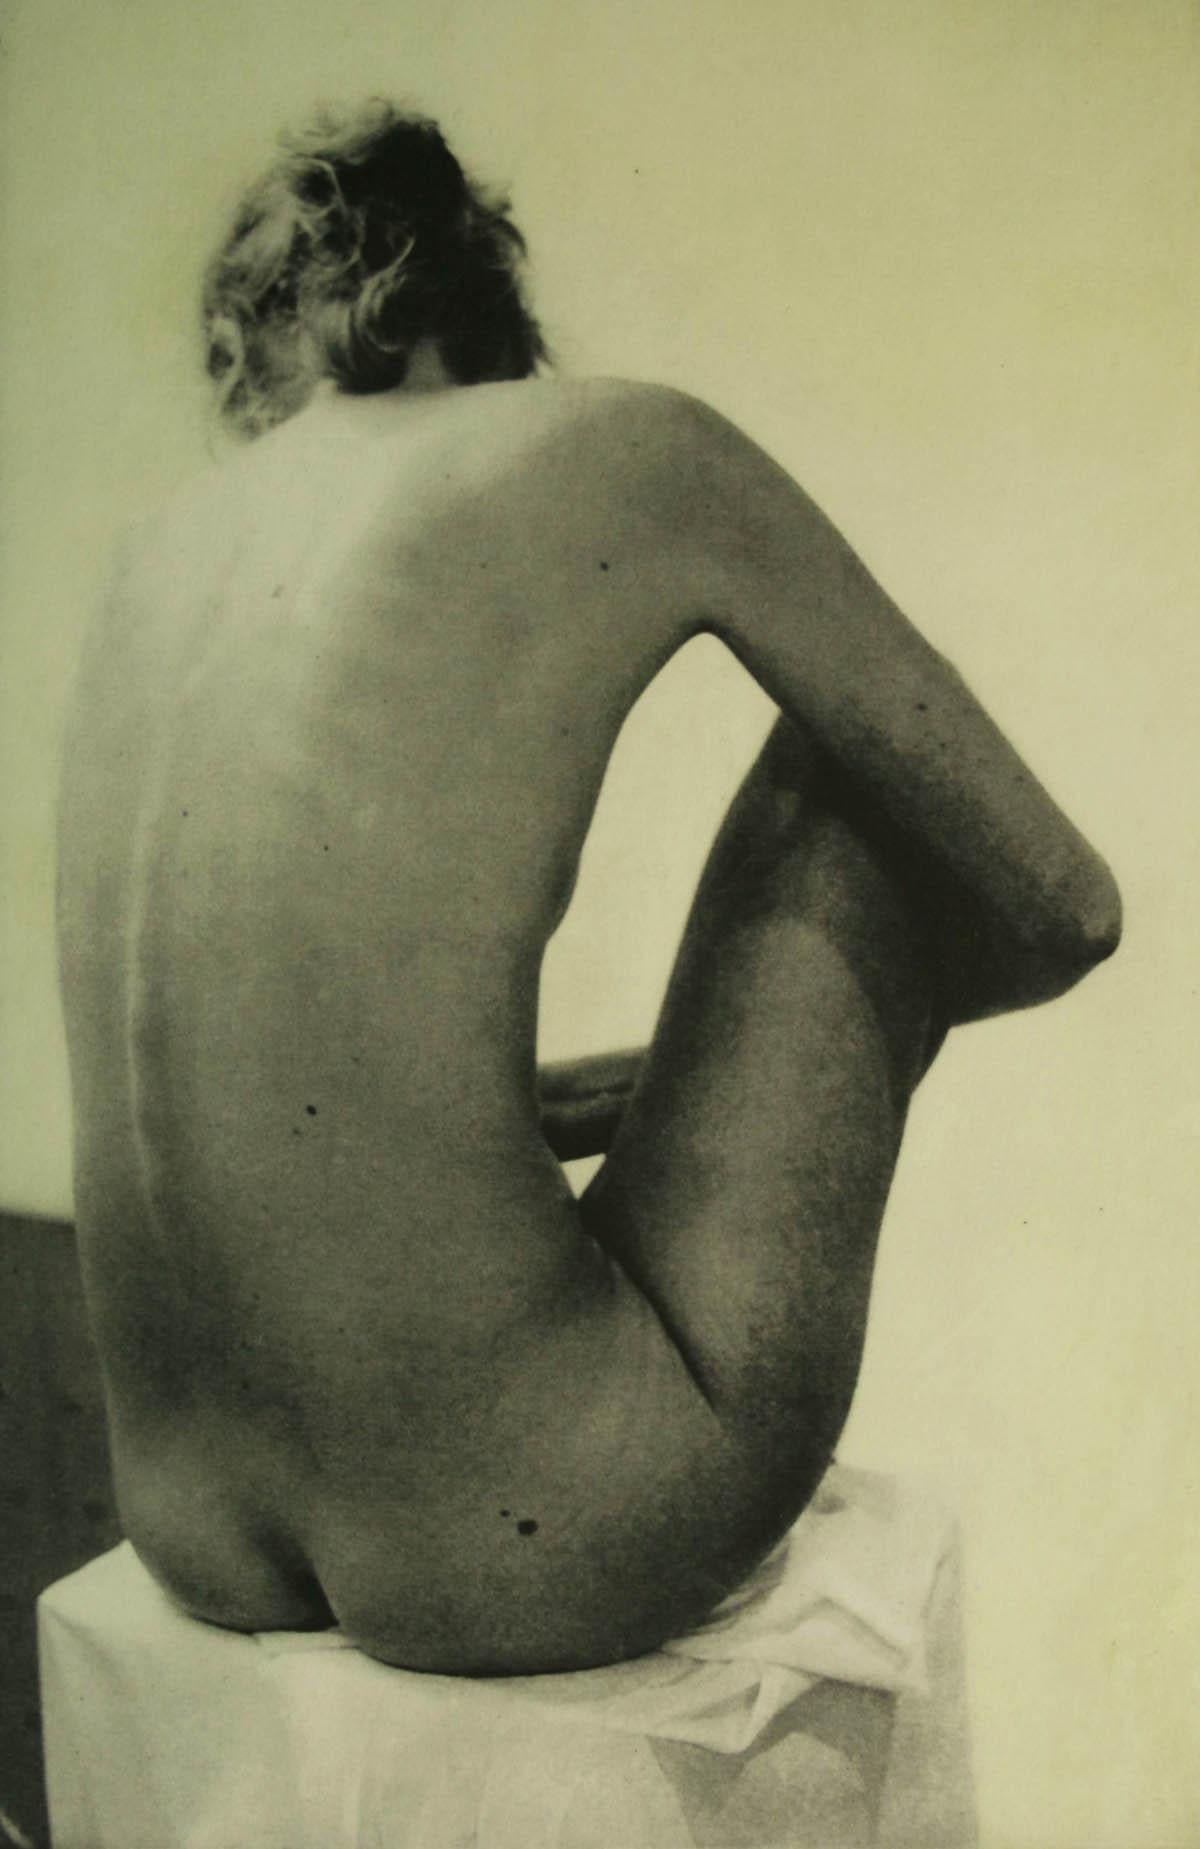 Clare Grossman Figurative Photograph - ‘The Shape of Her’, homage to Henry Moore BY CLARE GROSSMAN, Limited Edition Art